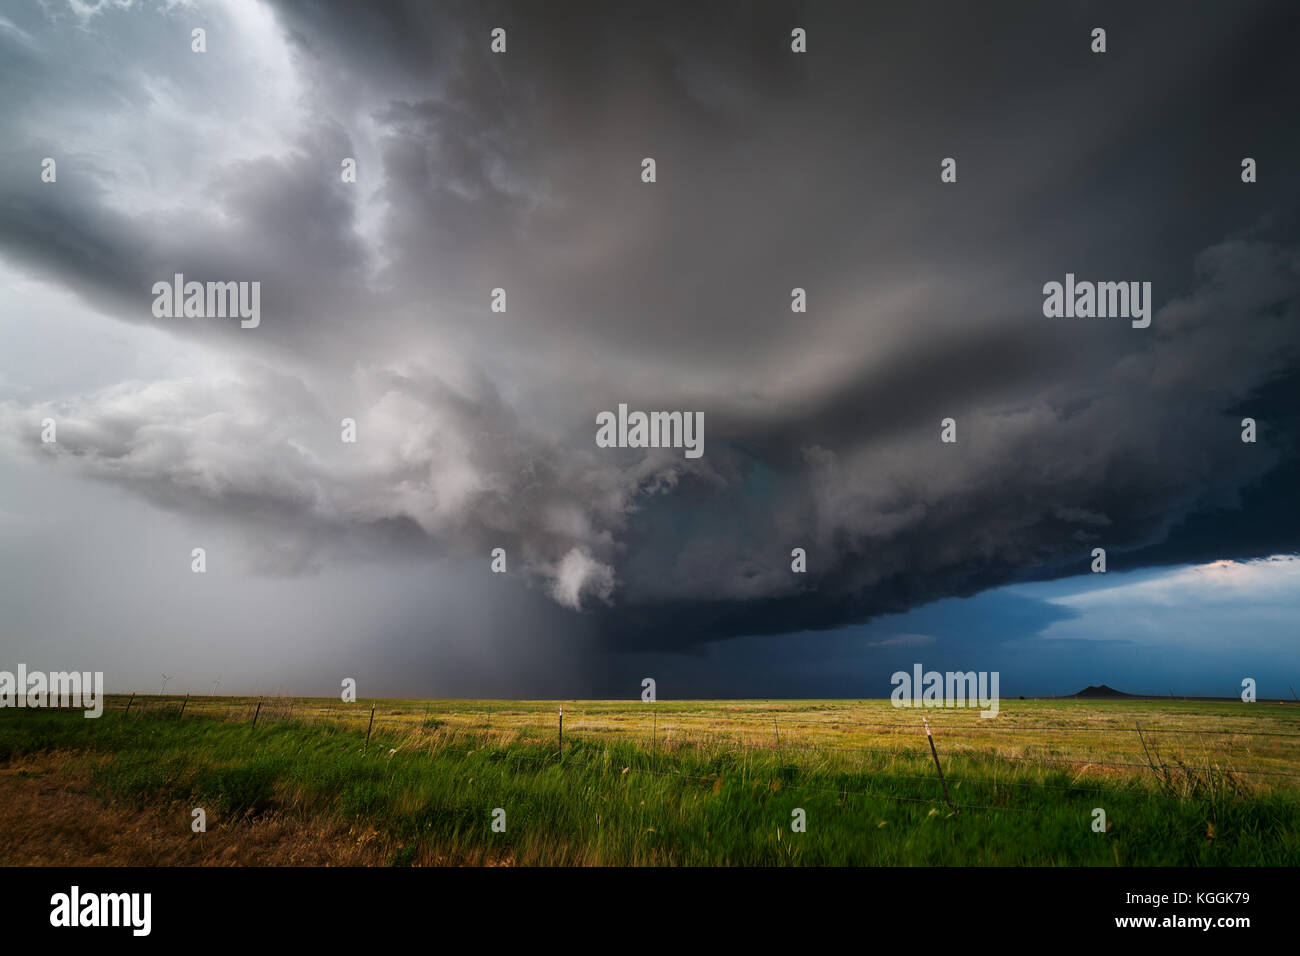 Supercell thunderstorm with dramatic, dark clouds Stock Photo